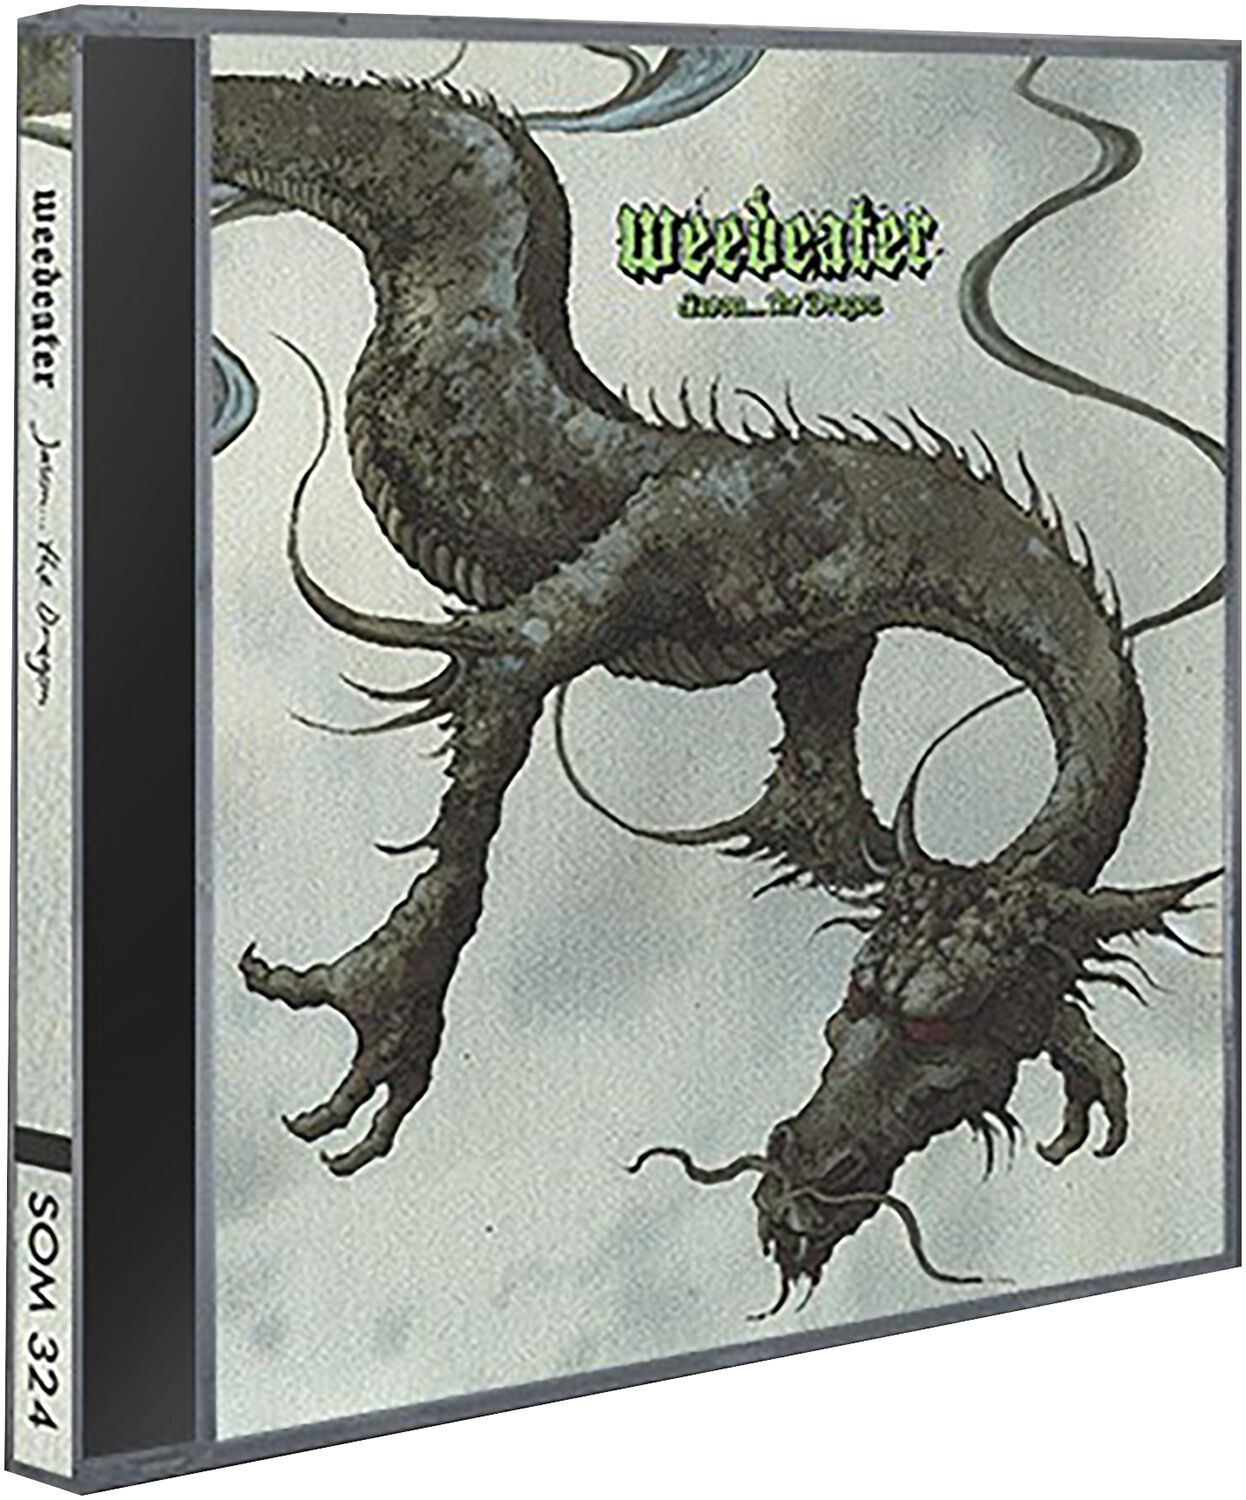 Weedeater Jason...The dragon CD multicolor